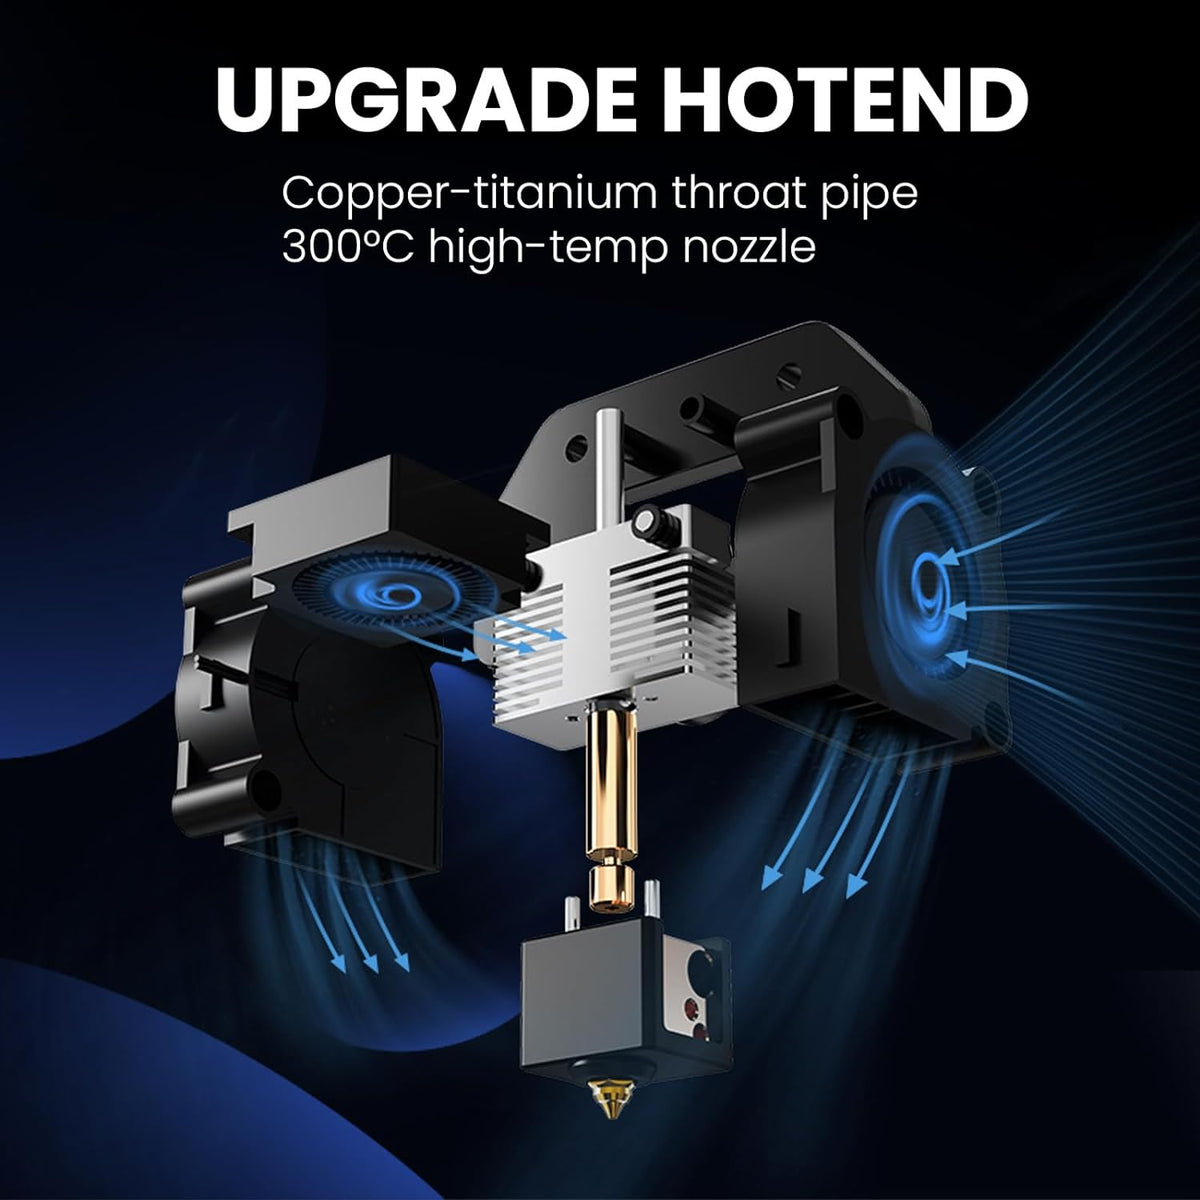 Hotend for Neptune 3 Pro/Plus/Max and 4/4 Pro